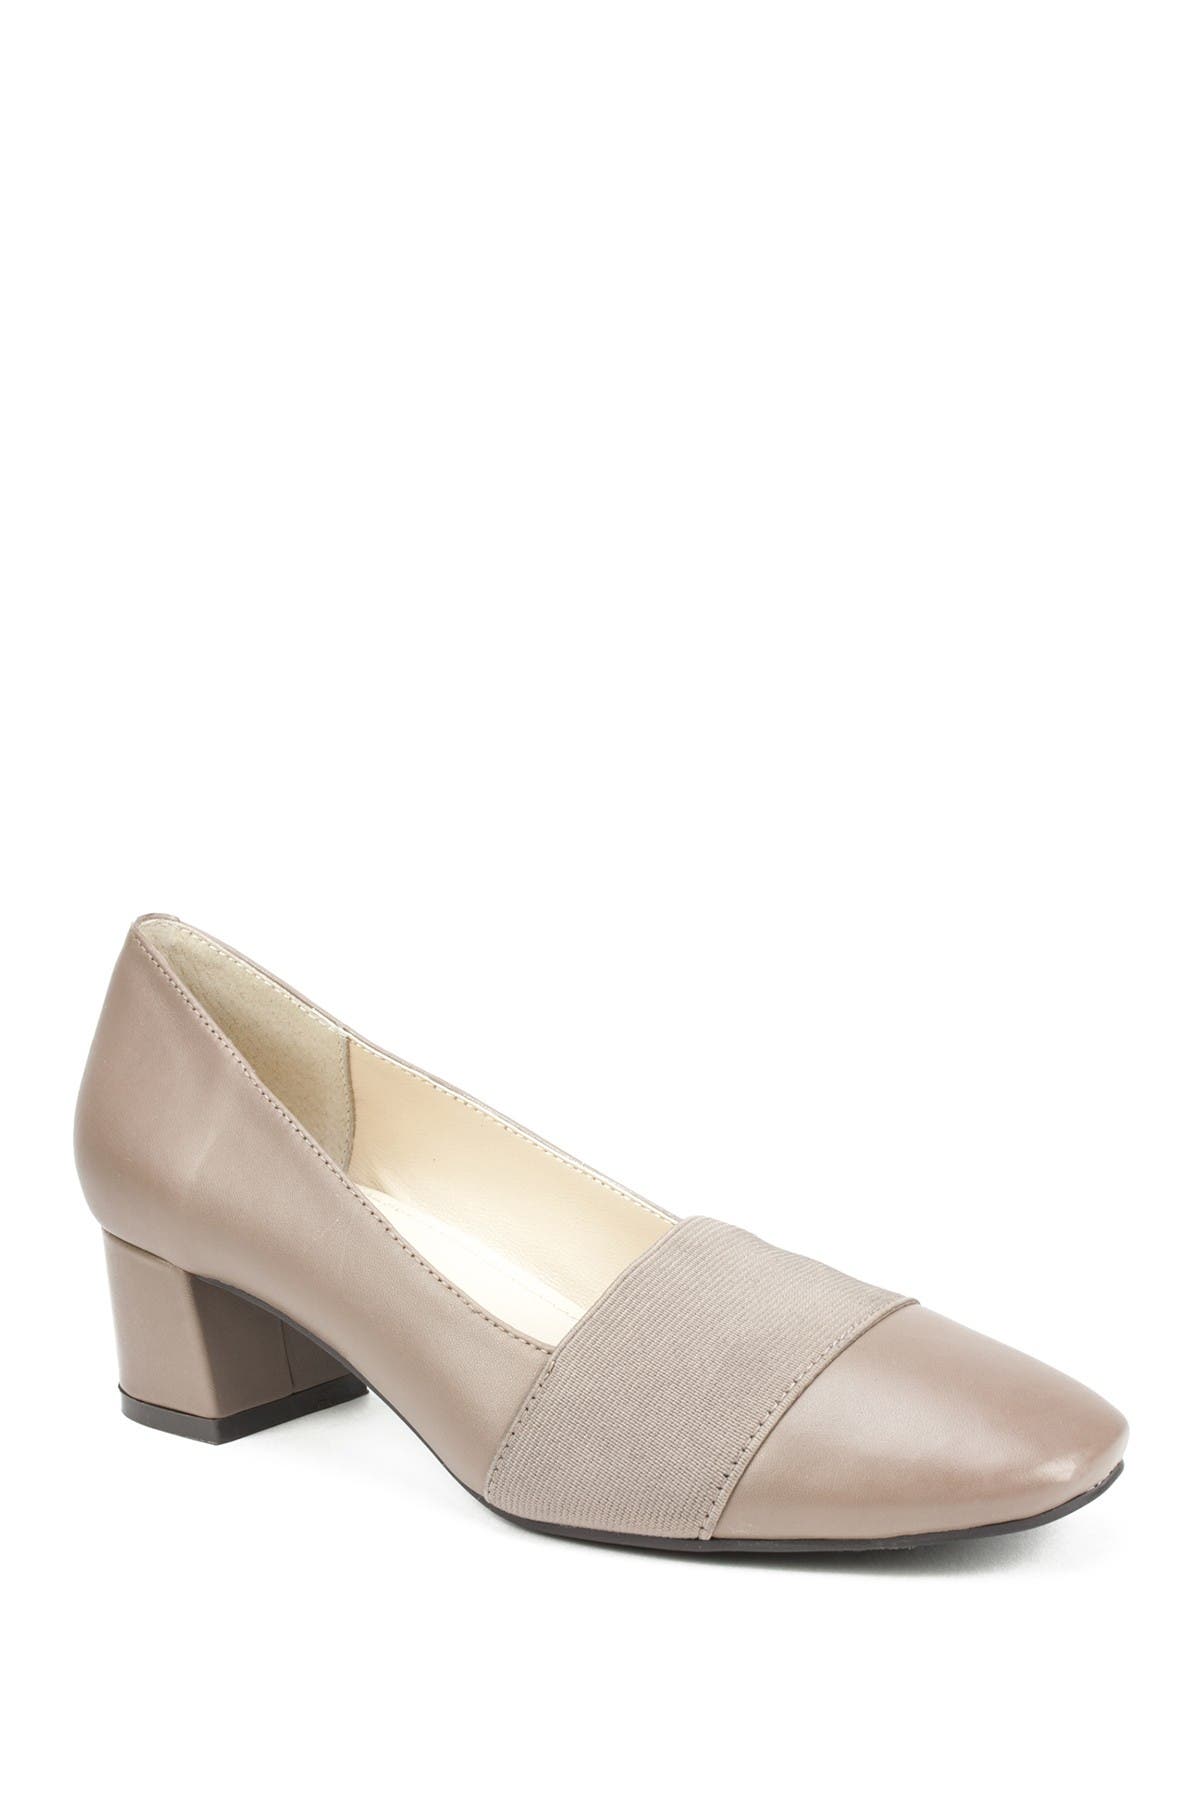 nordstrom nude shoes